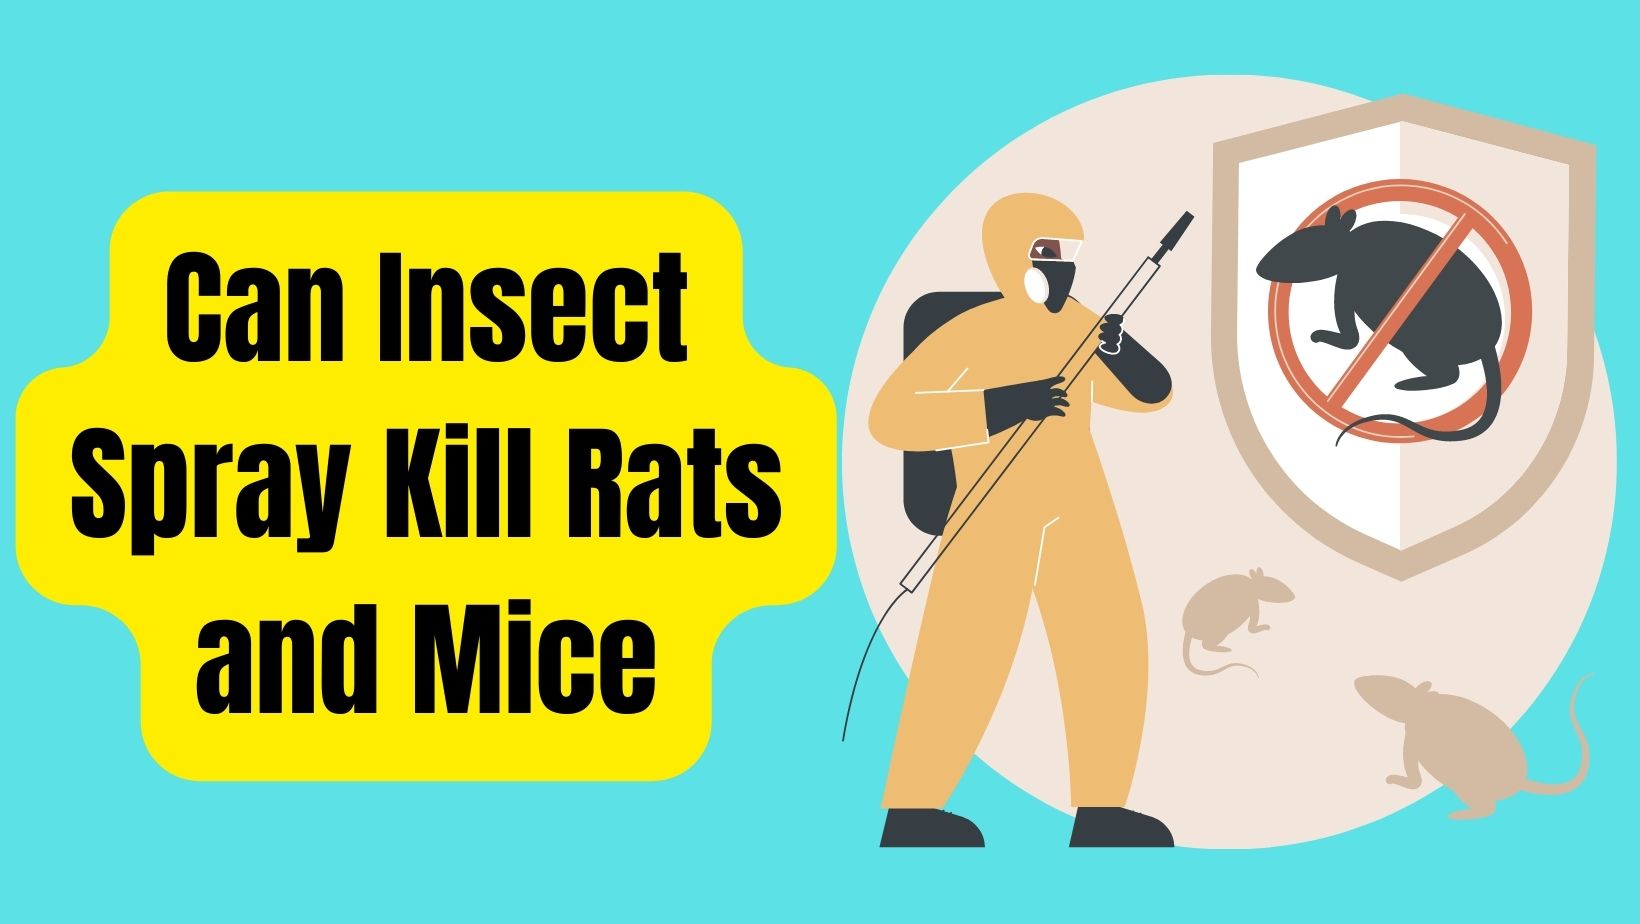 Can Insect Spray Kill Rats and Mice?